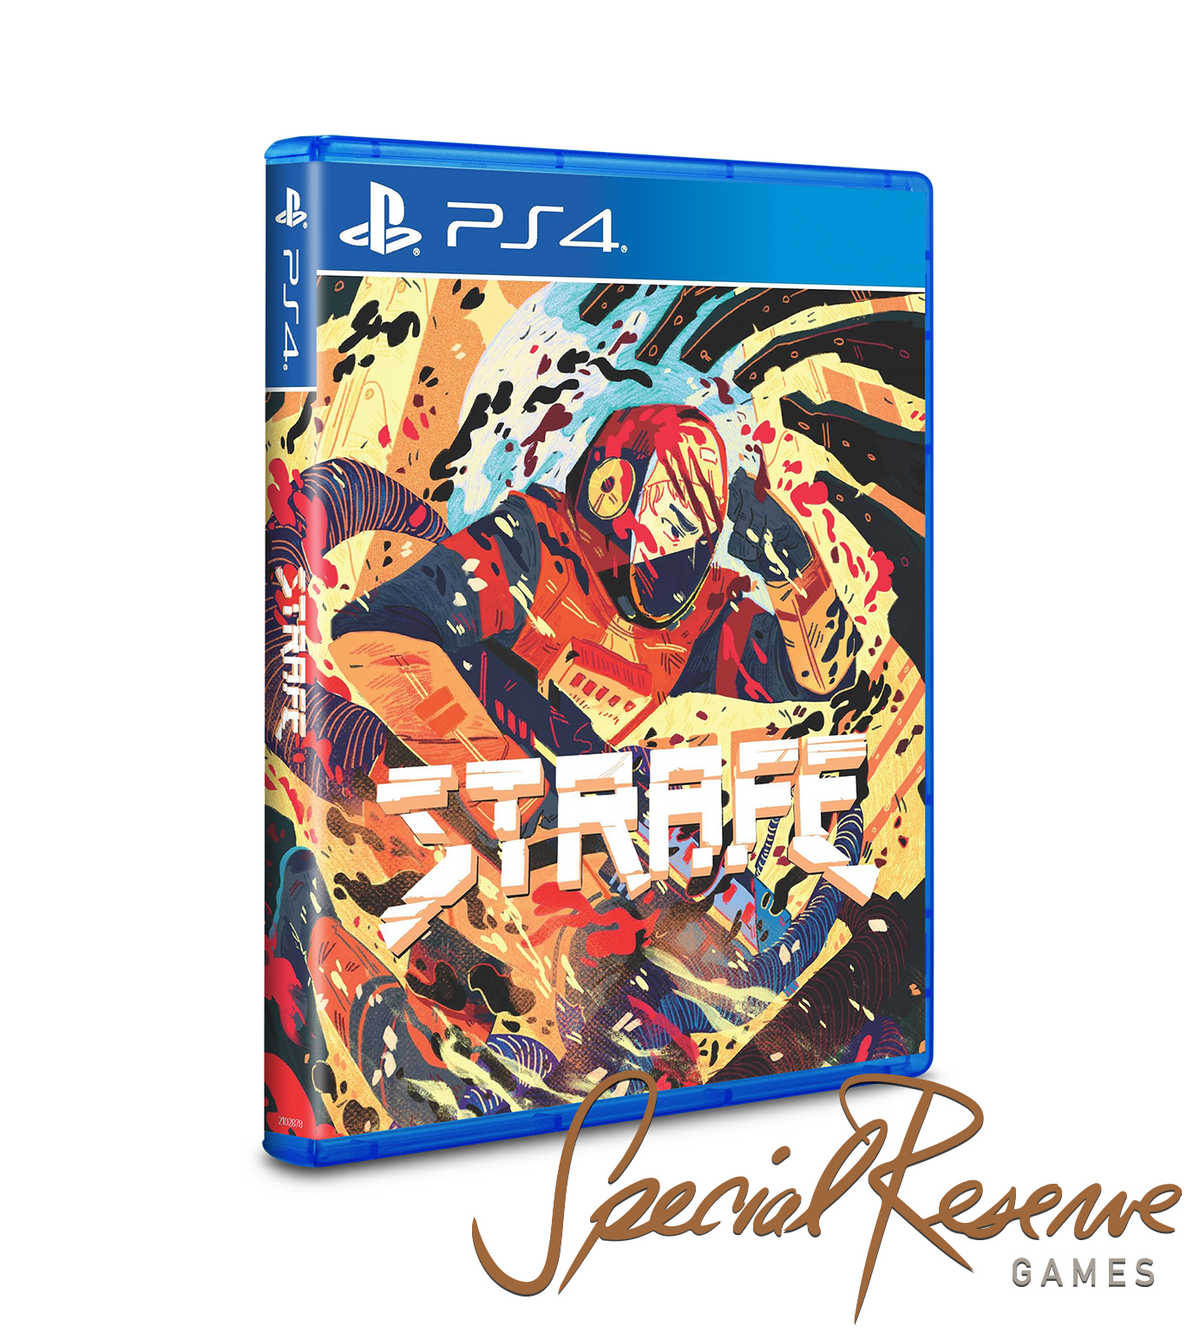 STRAFE (PS4) - Exclusive Variant